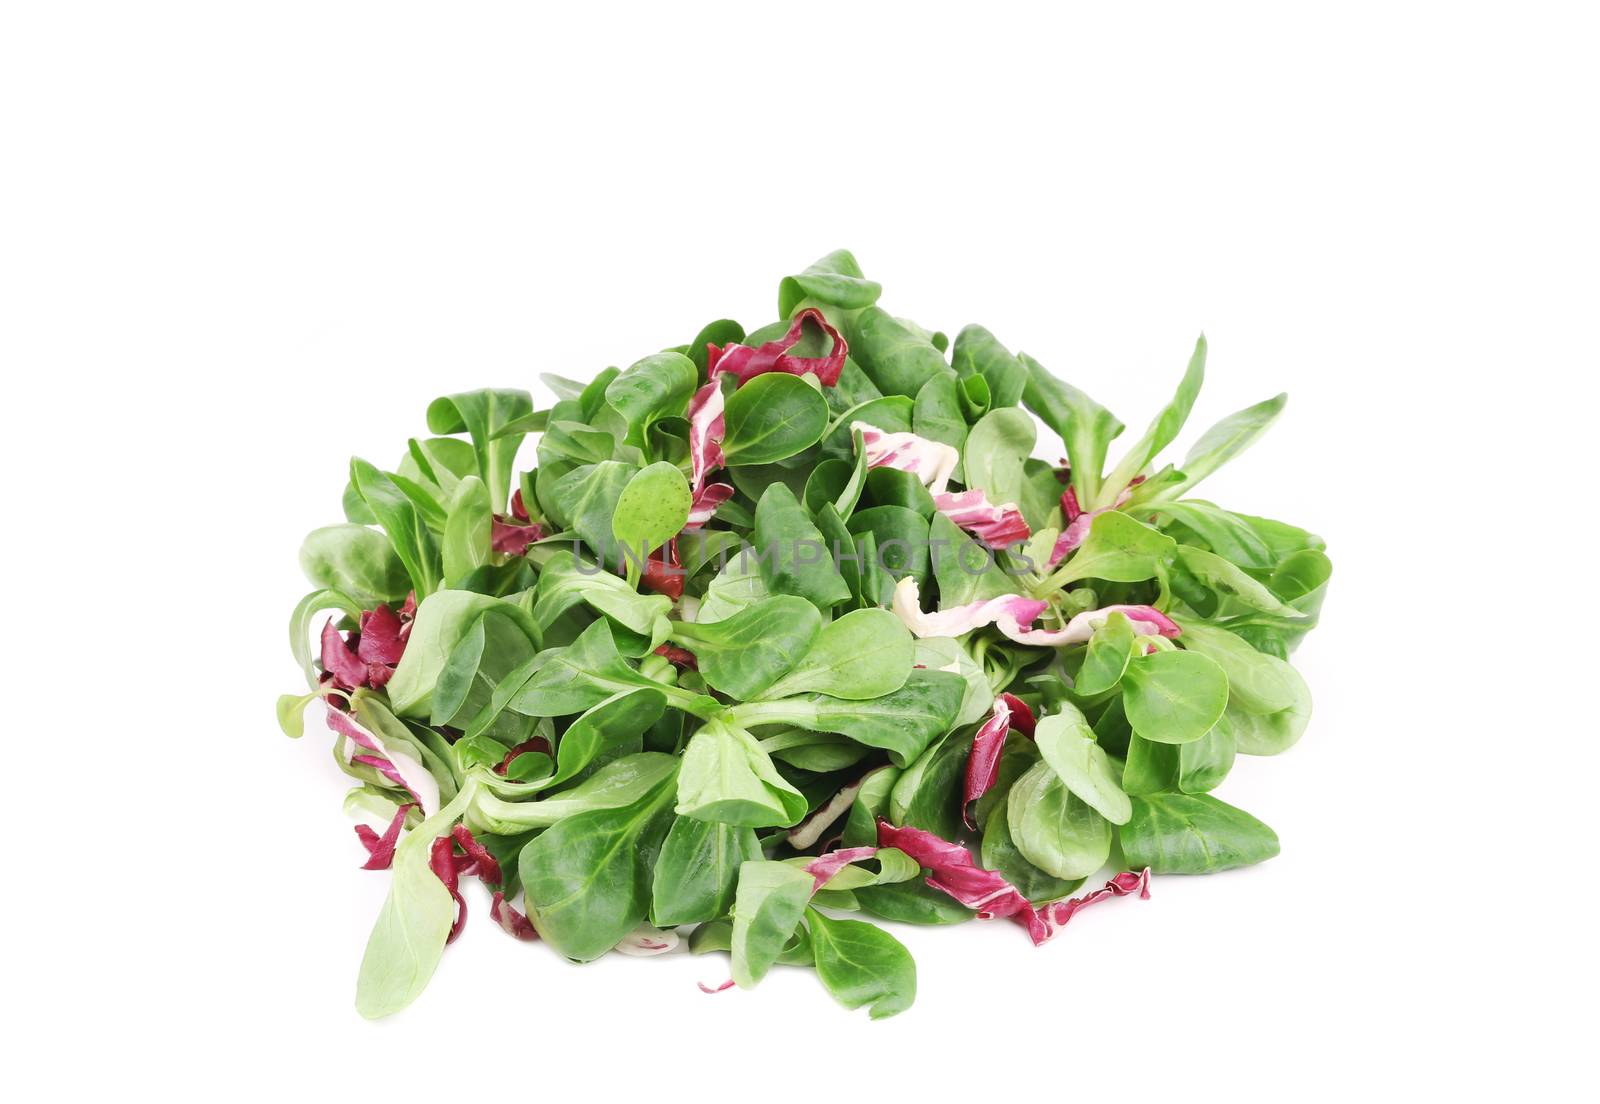 Spinach and radicchio rosso mix. Isolated on a white background.